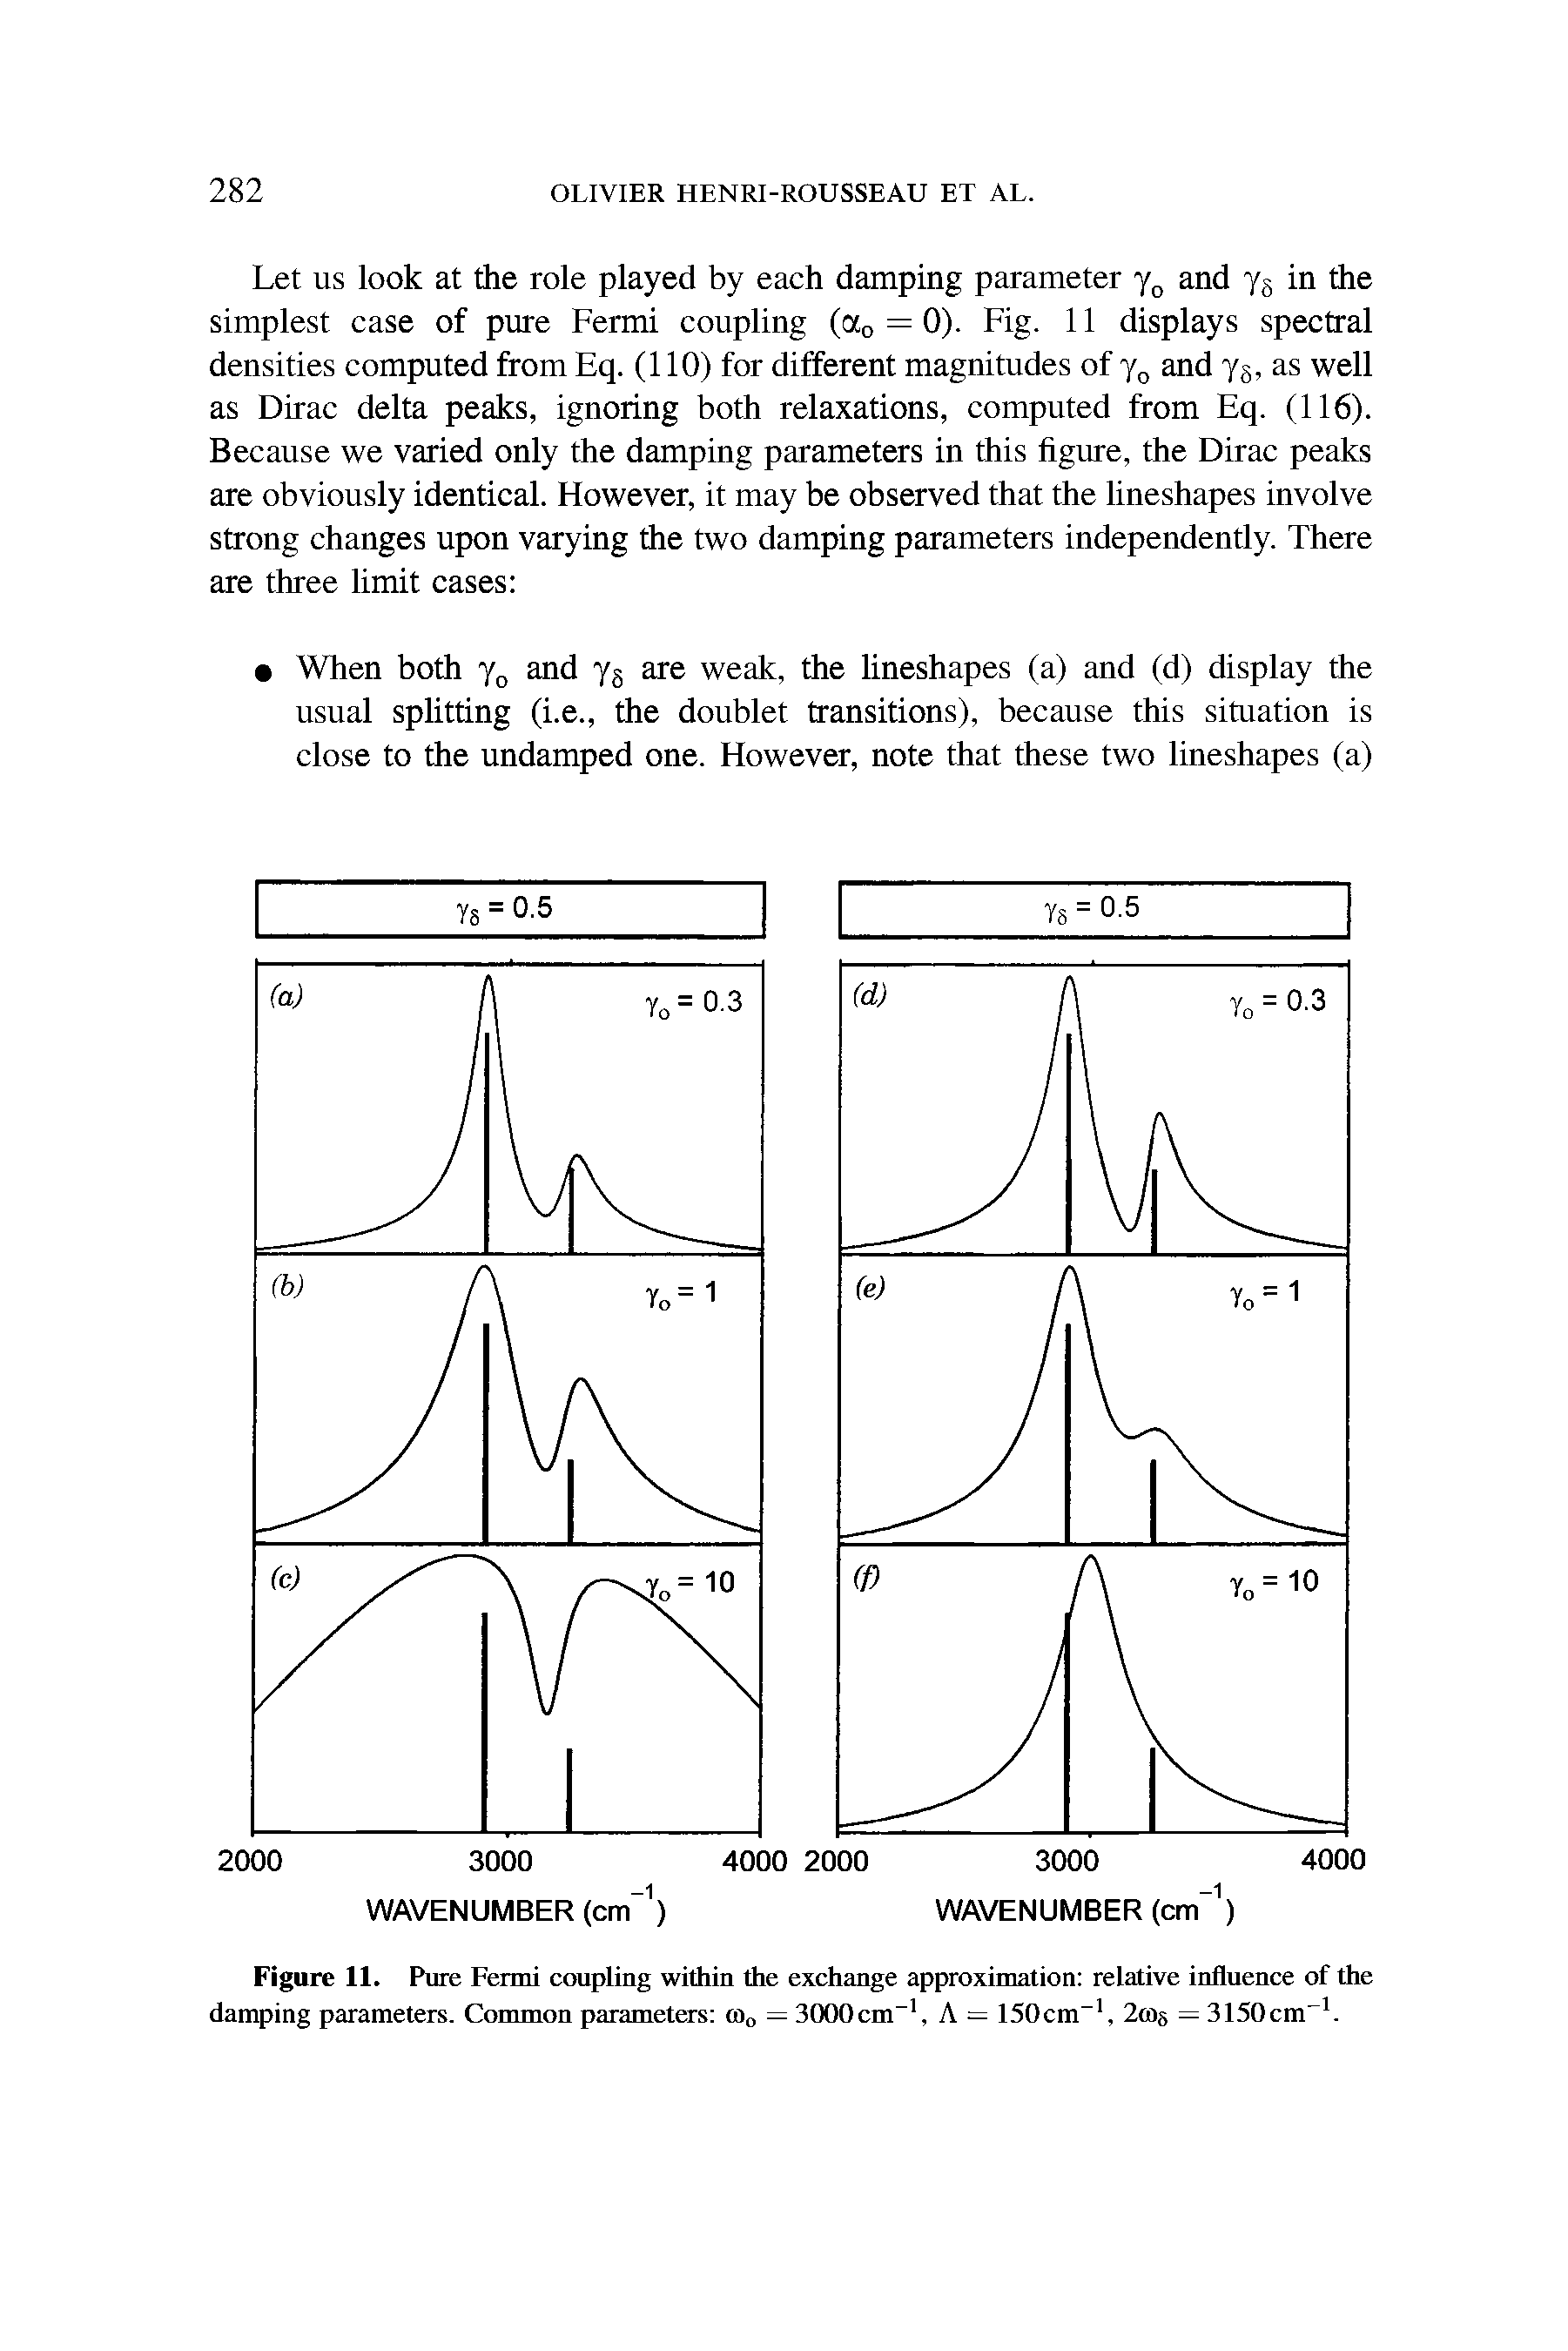 Figure 11. Pure Fermi coupling within the exchange approximation relative influence of the damping parameters. Common parameters <D0 — 3000cm-1, A = 150cm-1, 2(Og — 3150cm-1.